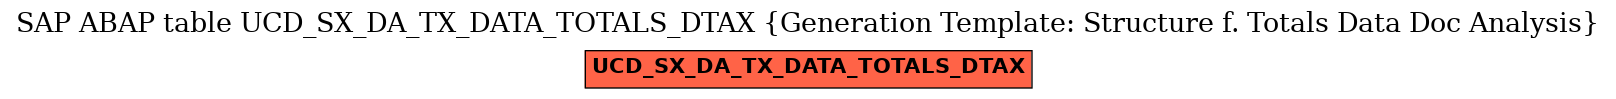 E-R Diagram for table UCD_SX_DA_TX_DATA_TOTALS_DTAX (Generation Template: Structure f. Totals Data Doc Analysis)